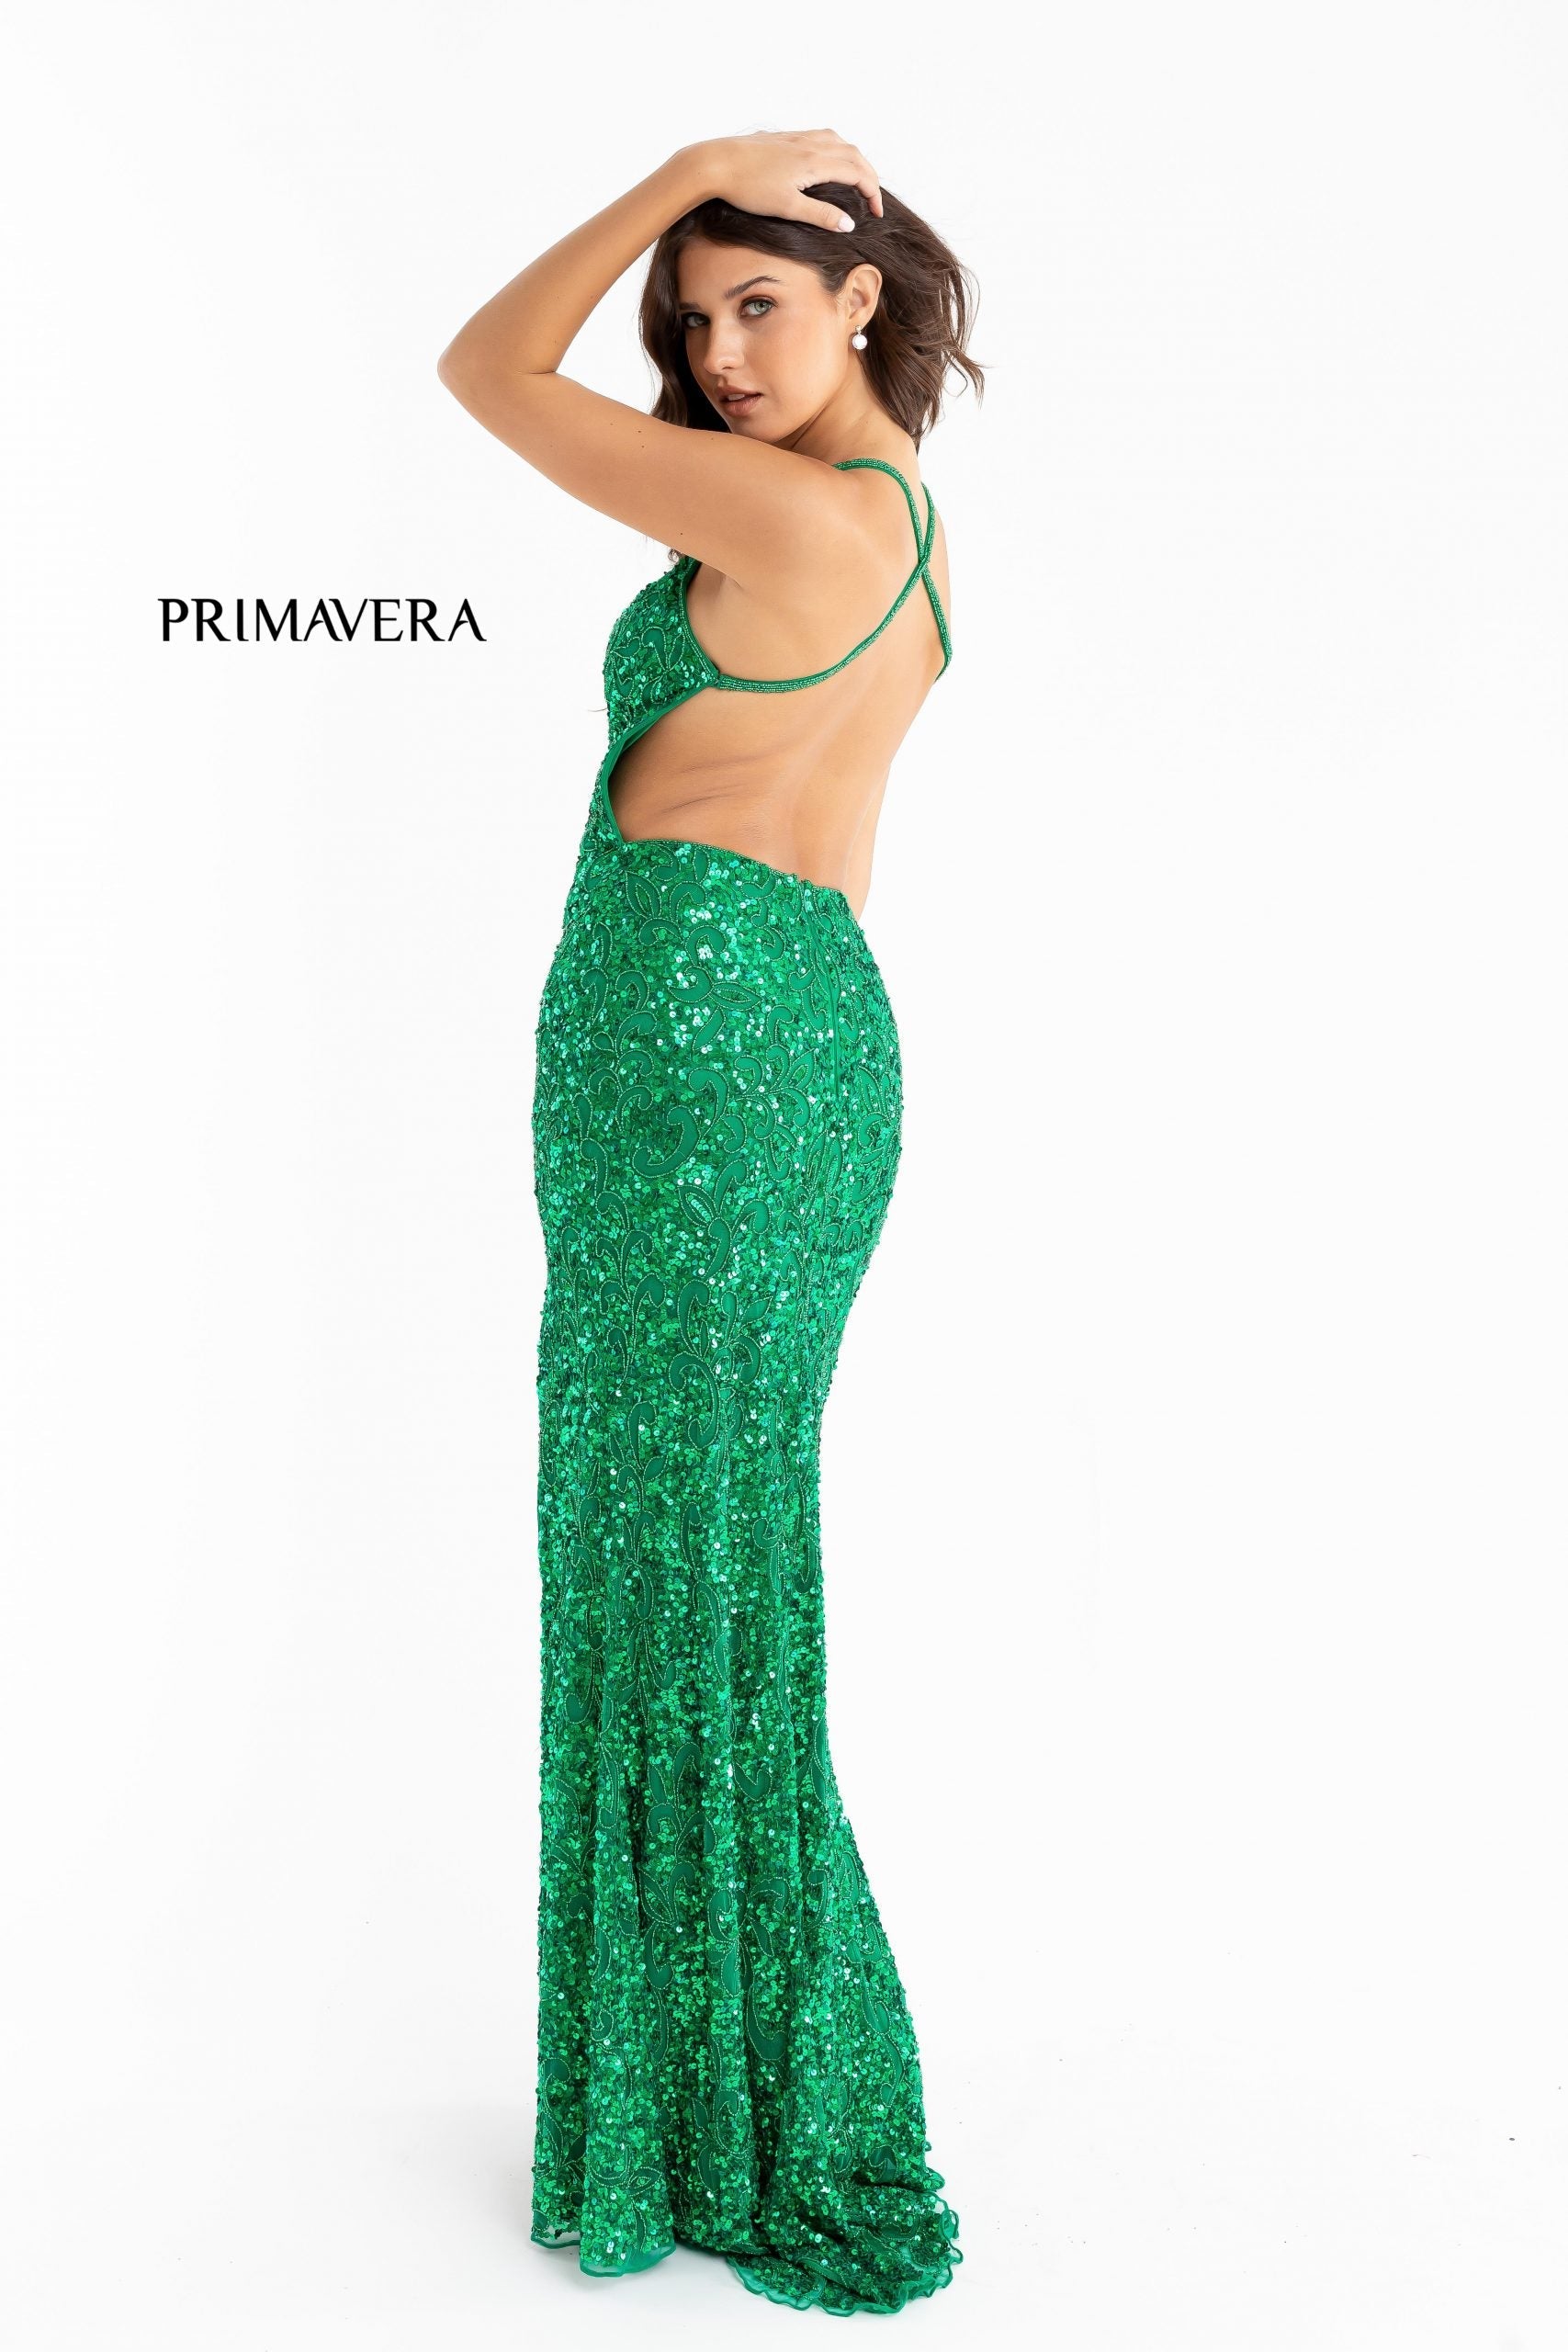 Primavera Couture 3295 Exclusive  Prom Dress, Formal Evening Gown.  This exclusive prom dress is designed with sequins throughout.  I has a V neckline with beaded spaghetti straps that crisscross in the open back.  It is long with a left side slit.  Available Colors:  FUSHIA,CREAM,EMERALD,IVORY,PEACOCK,BLACK,MIDNIGHT,NEON LILAC,NEON PINK,FORREST GREEN,PURPLE,TURQUOISE,CORAL,BLUE,RED,LIGHT BLUE,NEON SAGE